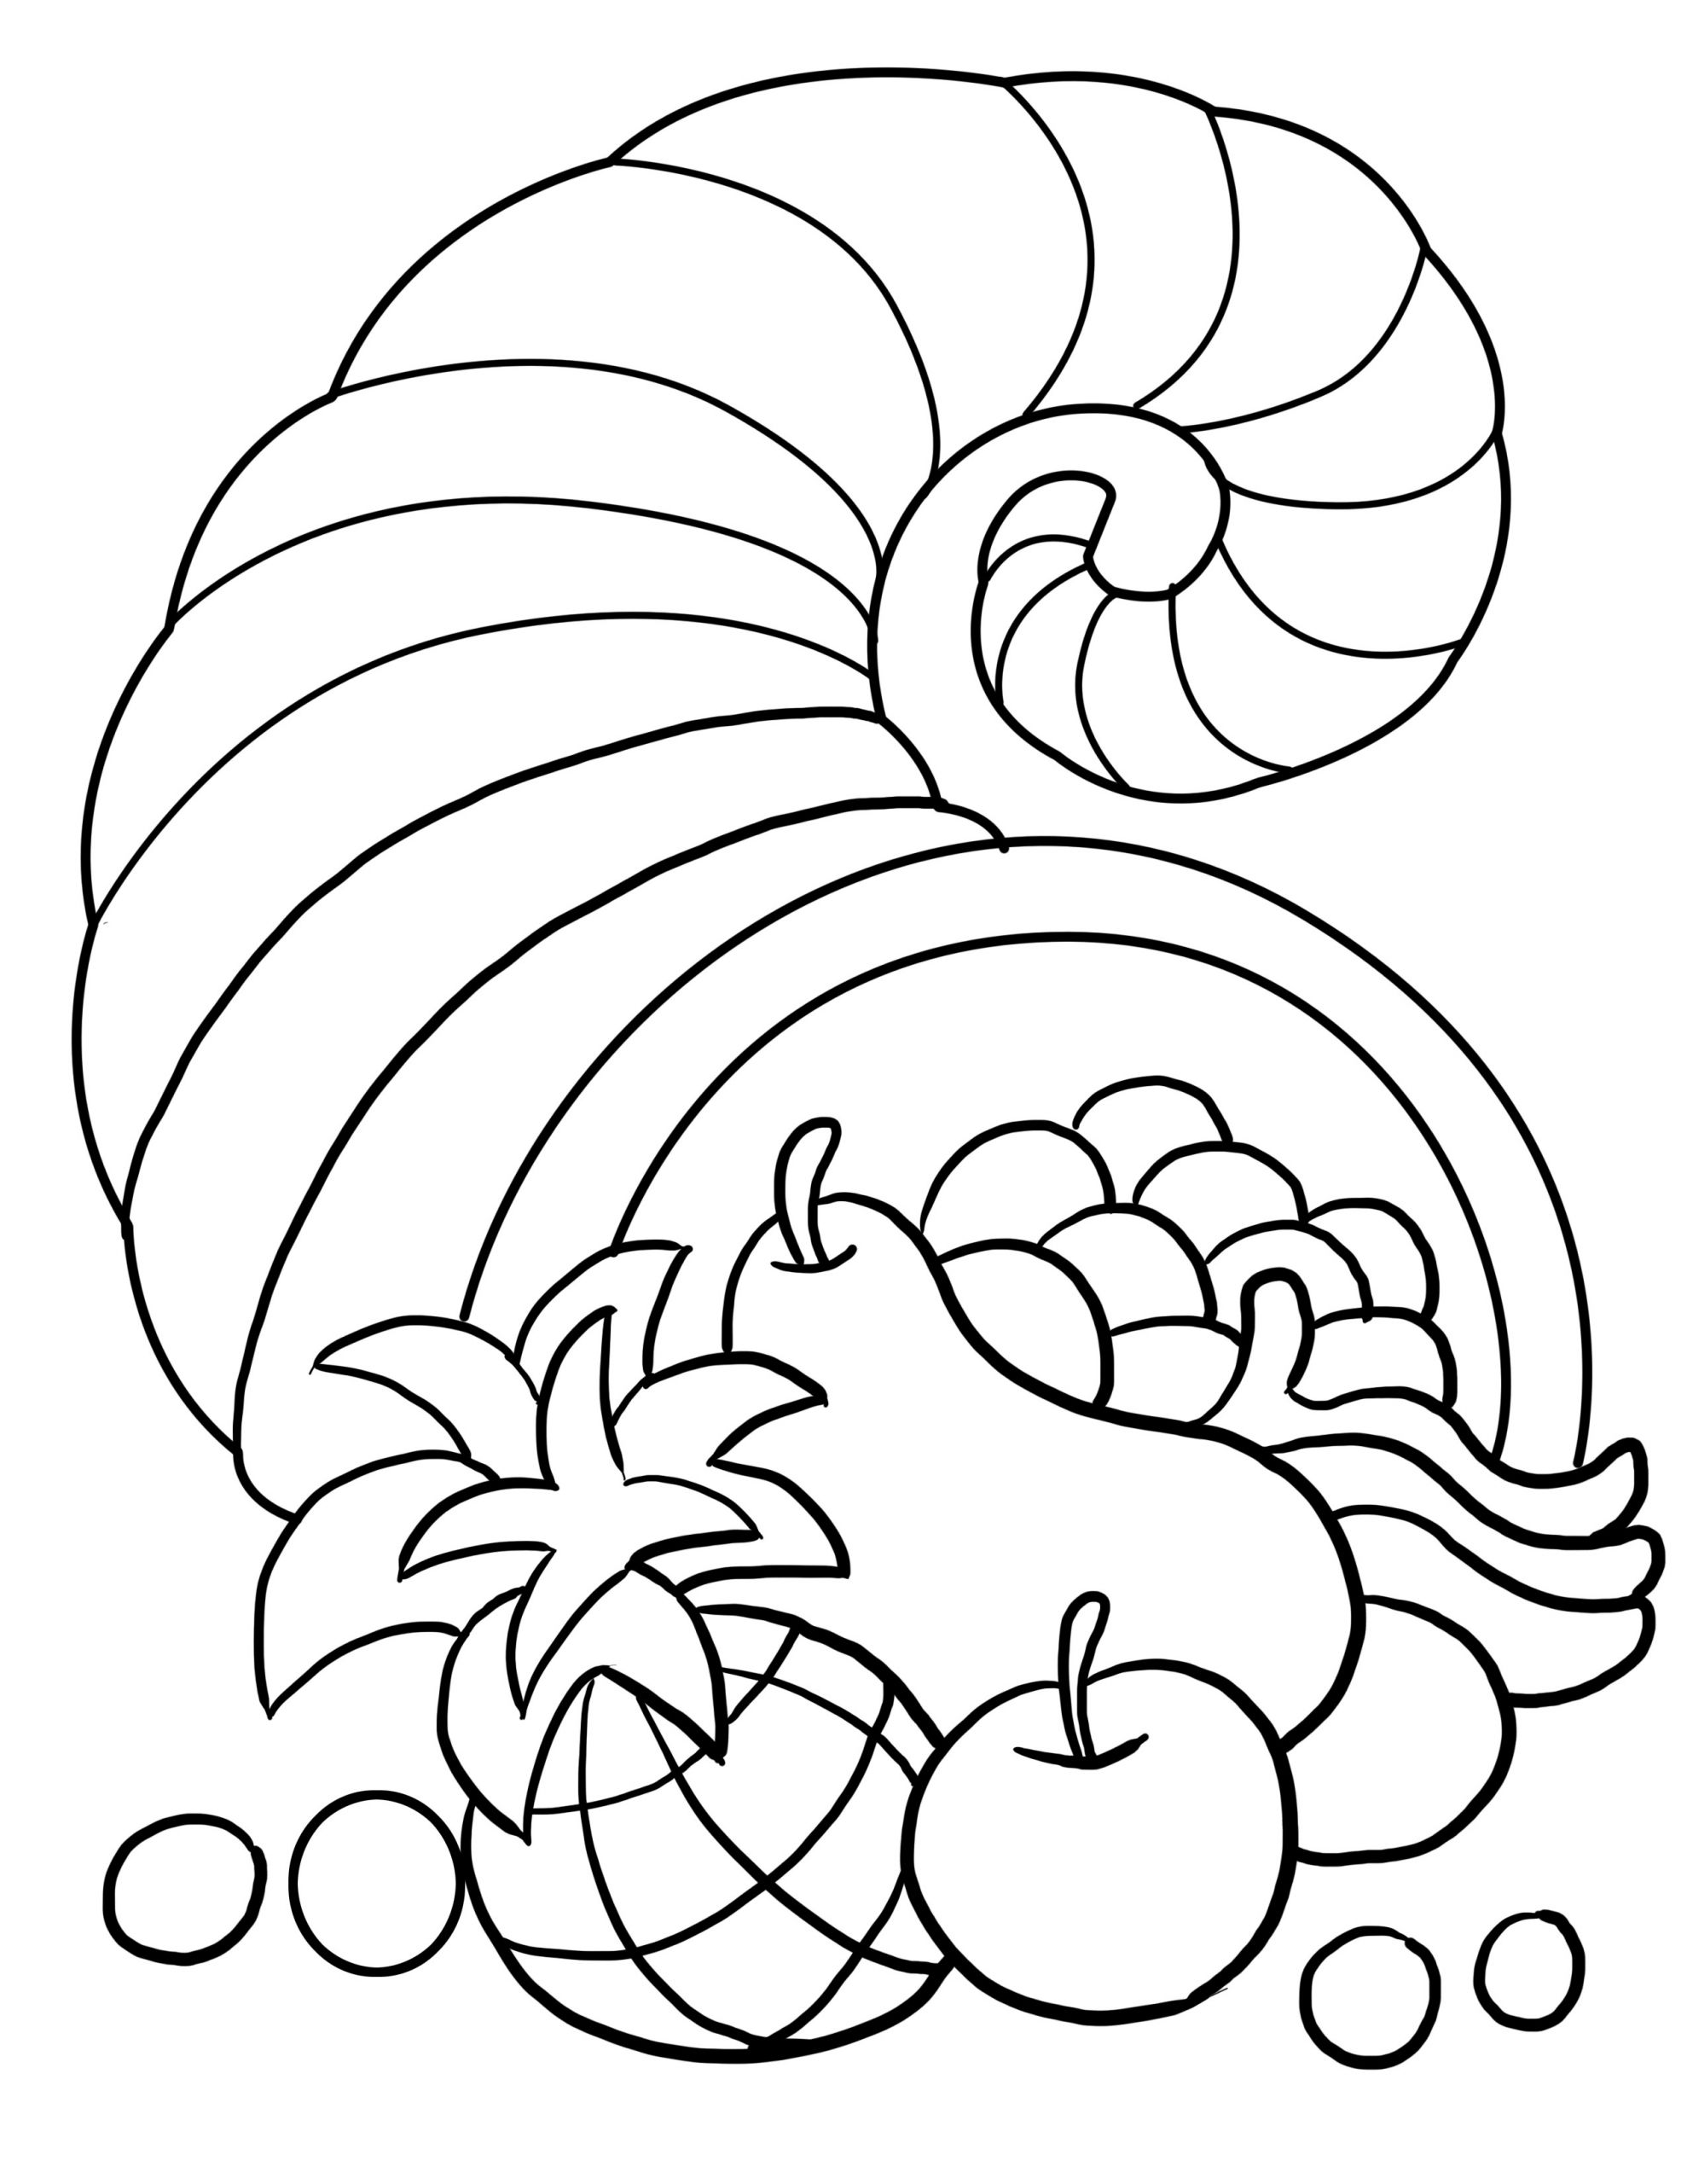 Thanksgiving Coloring Pages For Kids
 Thanksgiving Coloring Pages